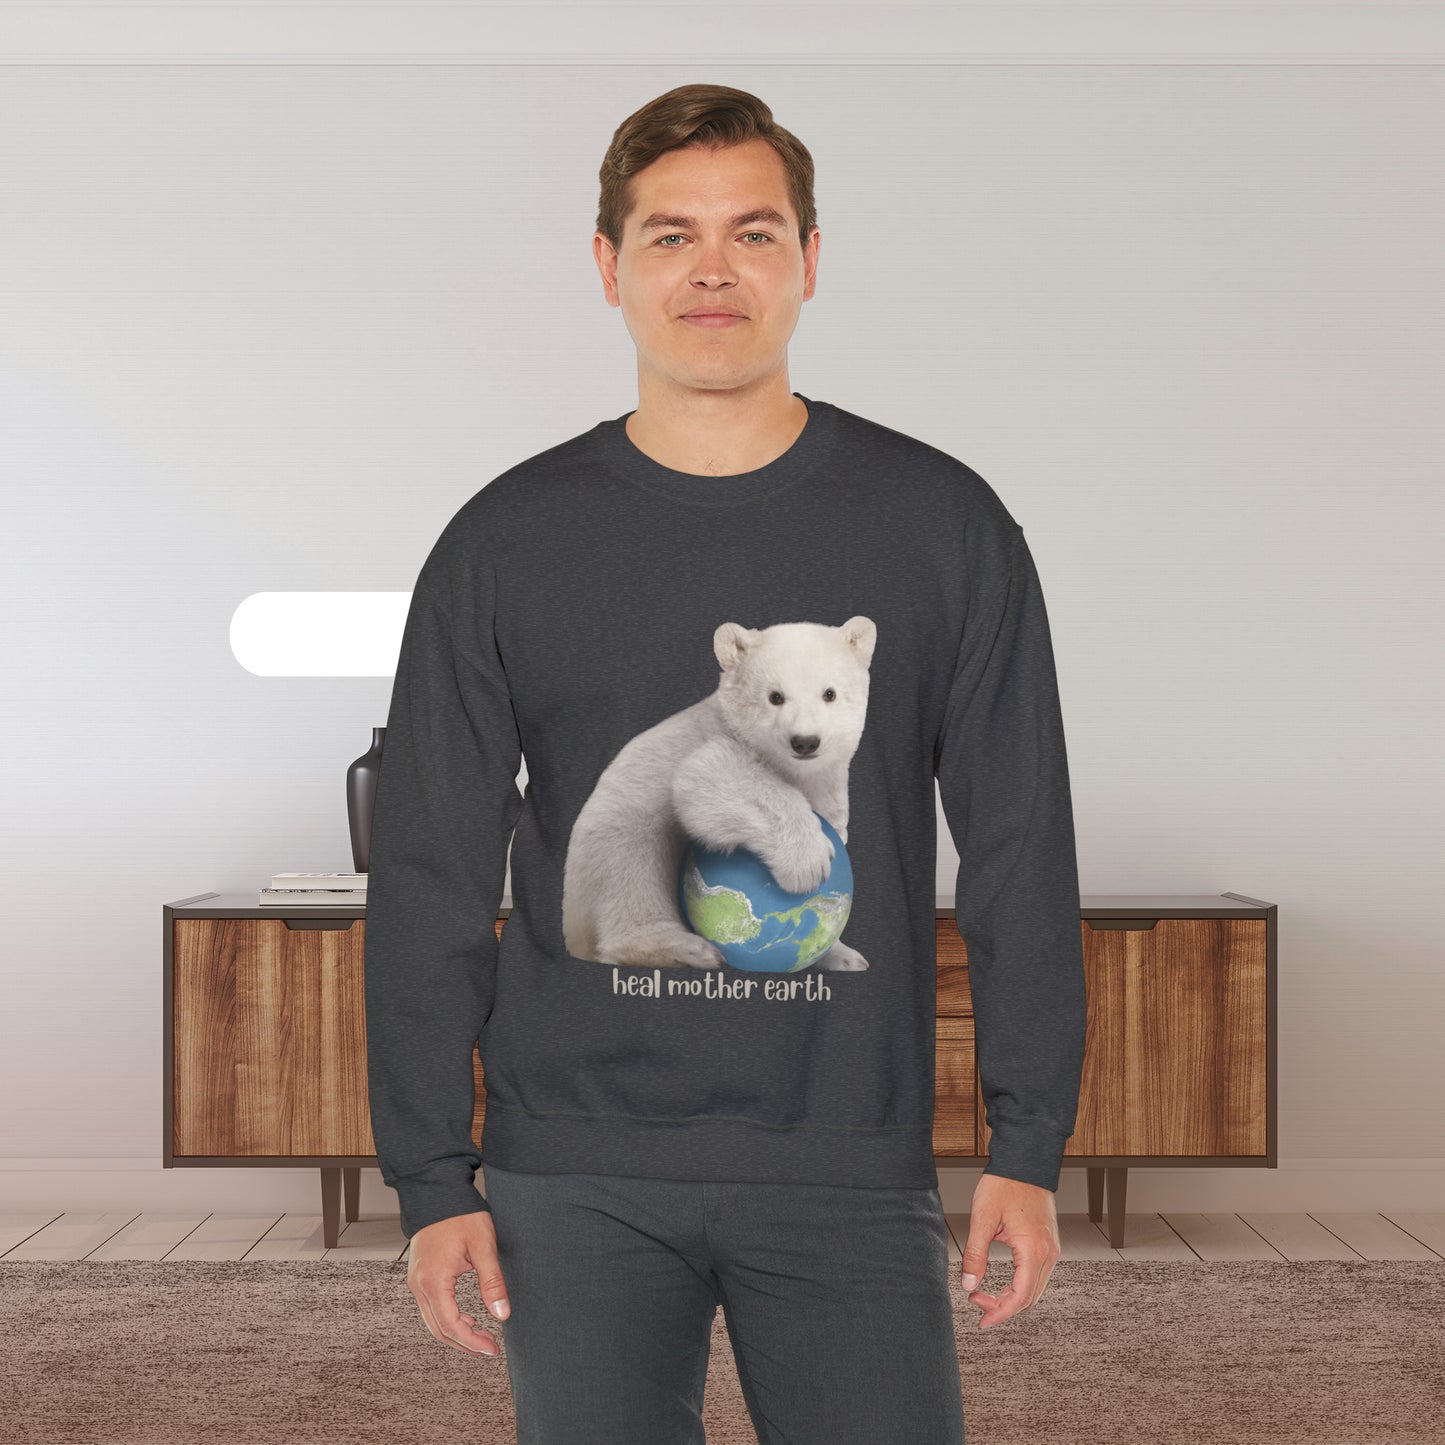 Adorable polar bear cub hugging Mother Earth and asks us to “Heal Mother Earth. ! We can do it together! Give the gift of this Unisex Heavy Blend™ Crewneck Sweatshirt or get one for yourself.